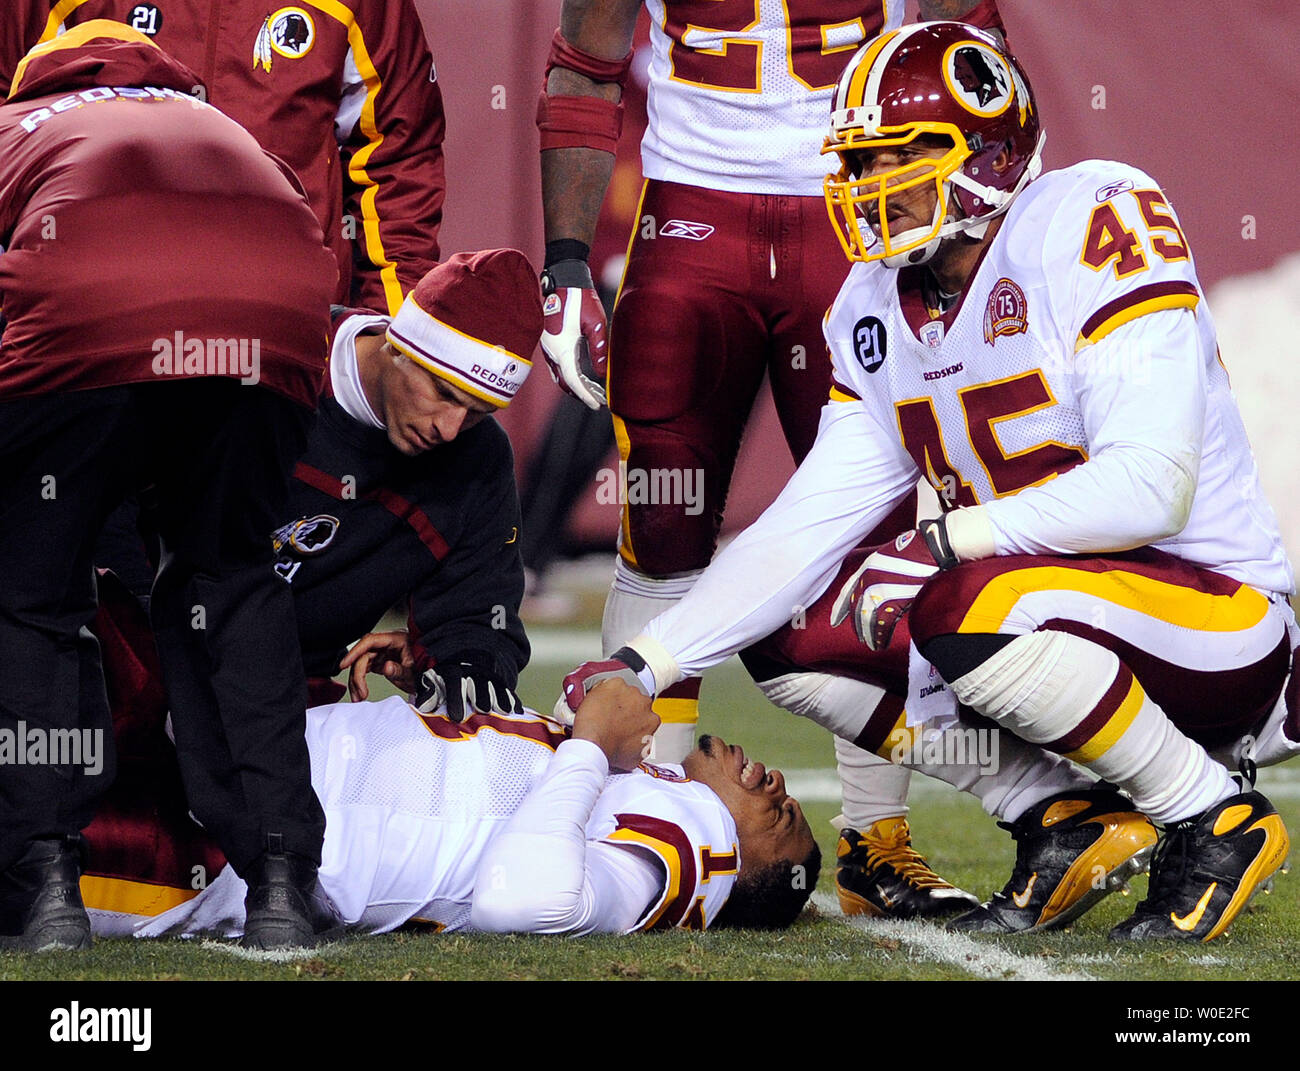 Washington Redskins quarterback Jason Campbell is attended to by fullback Mike Sellers and Redskins trainers after dislocating his left patella tendon in the second quarter against the Chicago Bears at FedEx Field in Landover, Maryland, on December 6, 2007.   (UPI Photo/Roger L. Wollenberg) Stock Photo